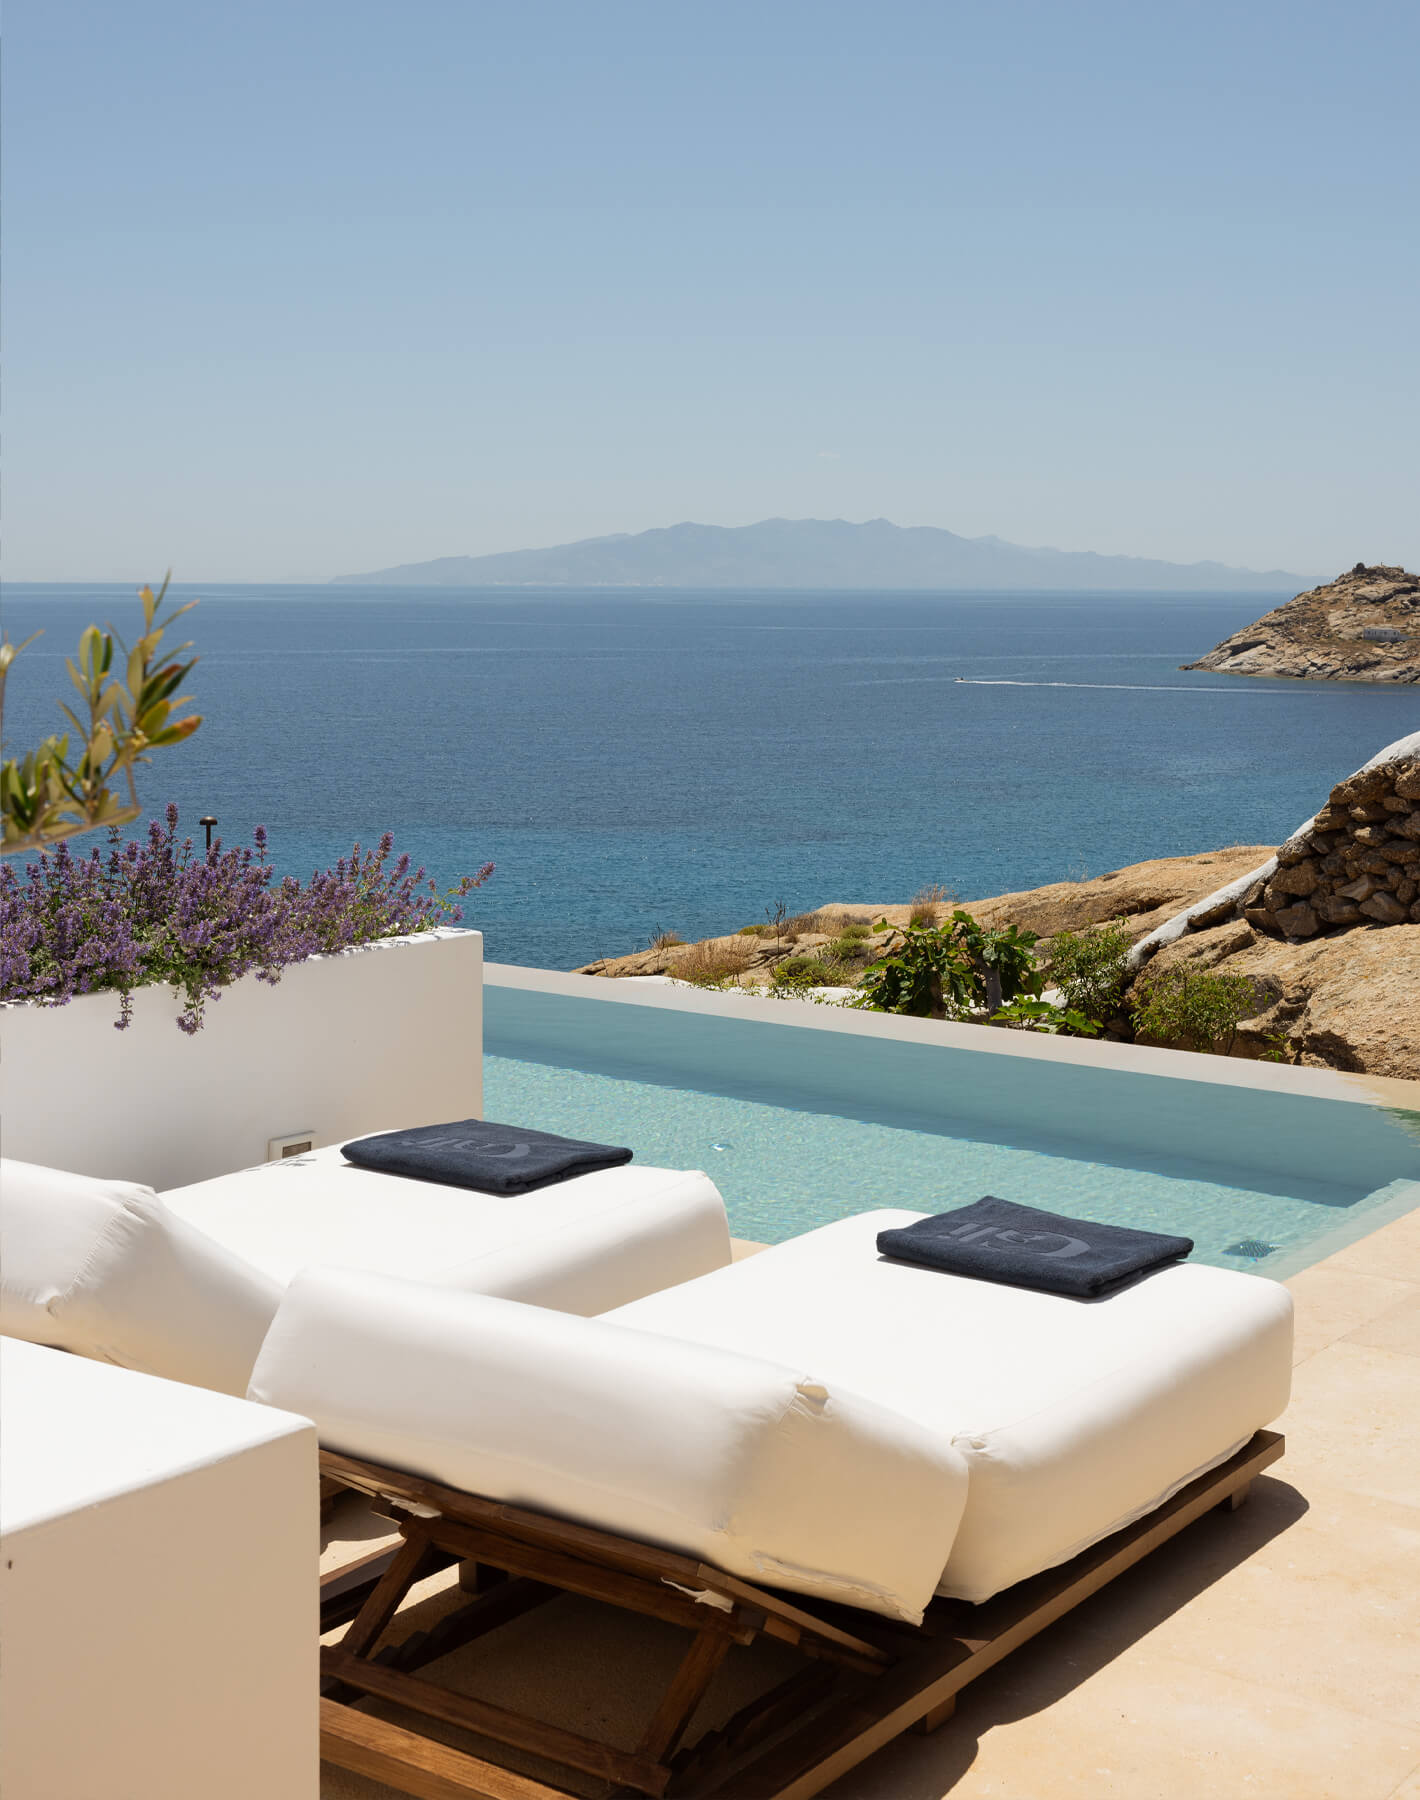 Elevate your stay with exclusive amenities tailored to your needs. Enjoy 24/7 room service, in-suite breakfast, and dining options curated for your taste. Indulge in the services of private wellness sessions and personal training, ensuring a bespoke and unforgettable experience at Cali Mykonos.